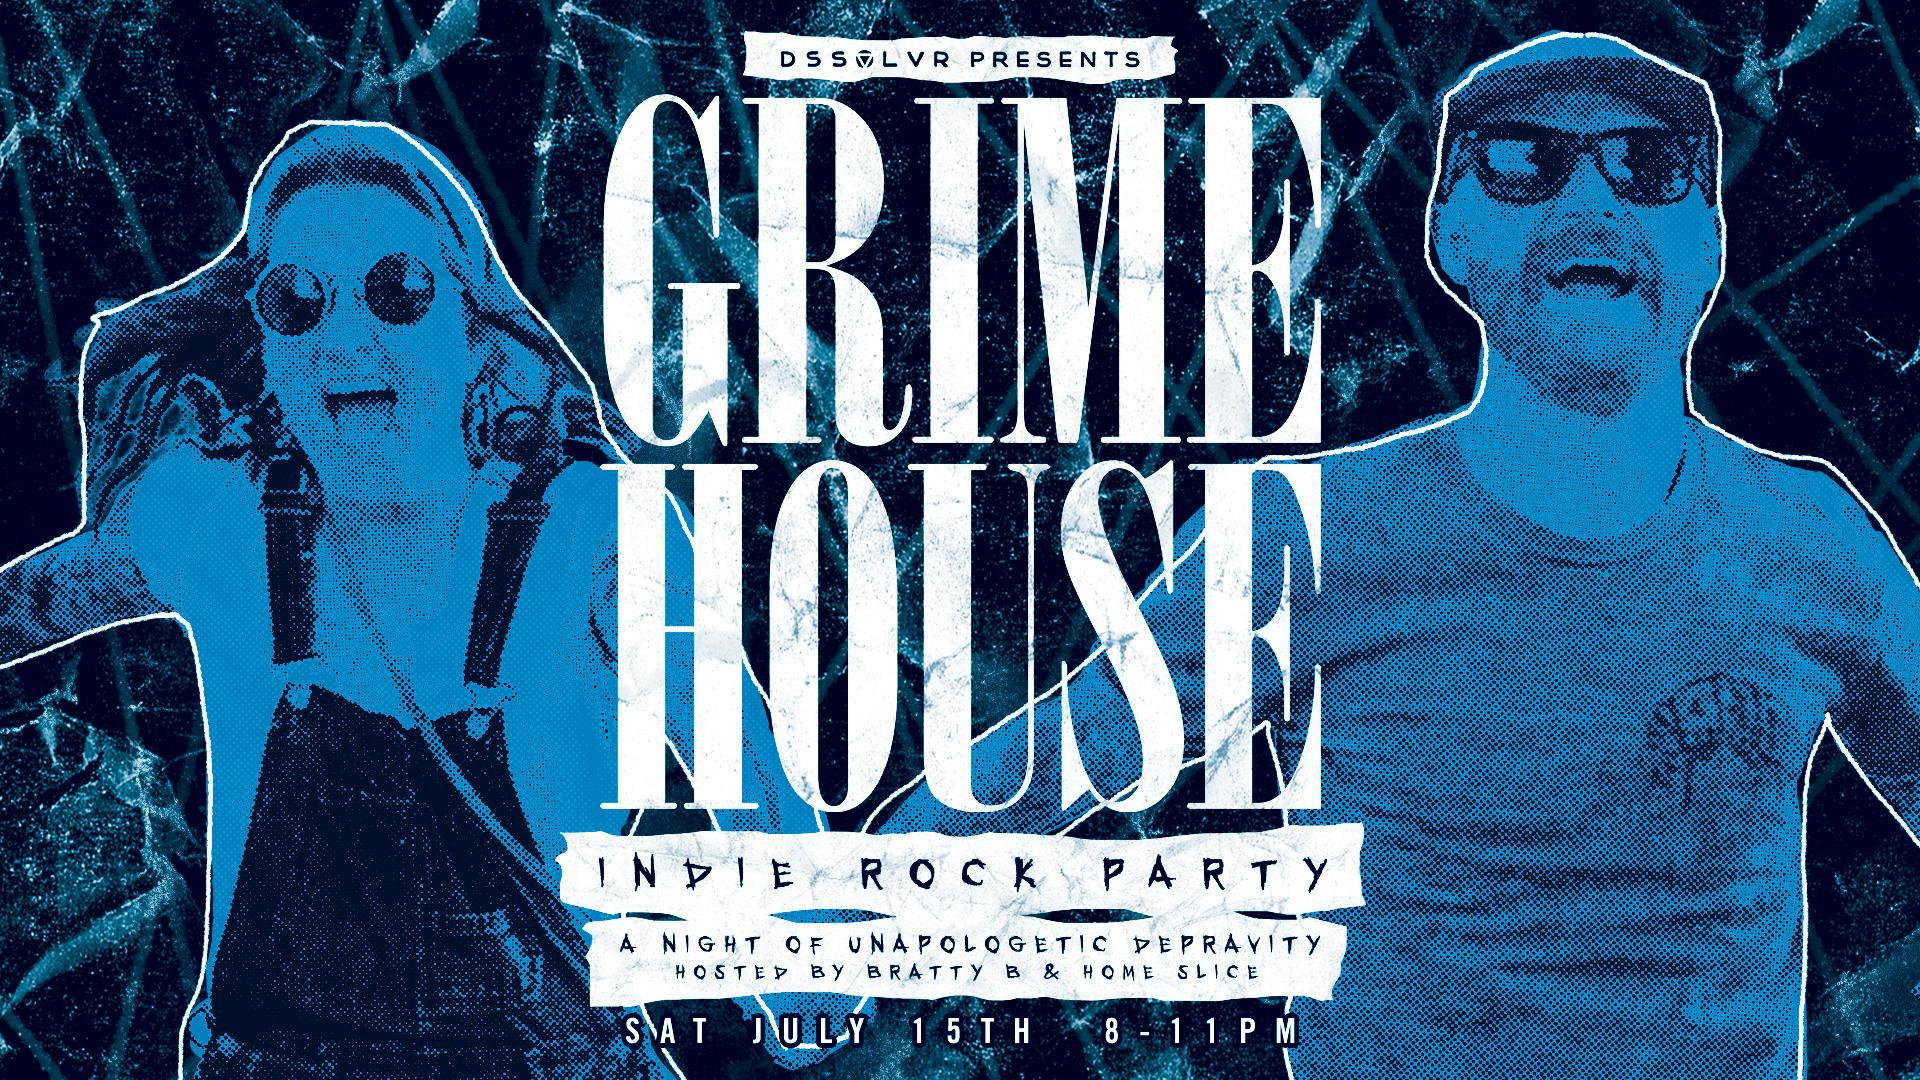 Grime-house-banner